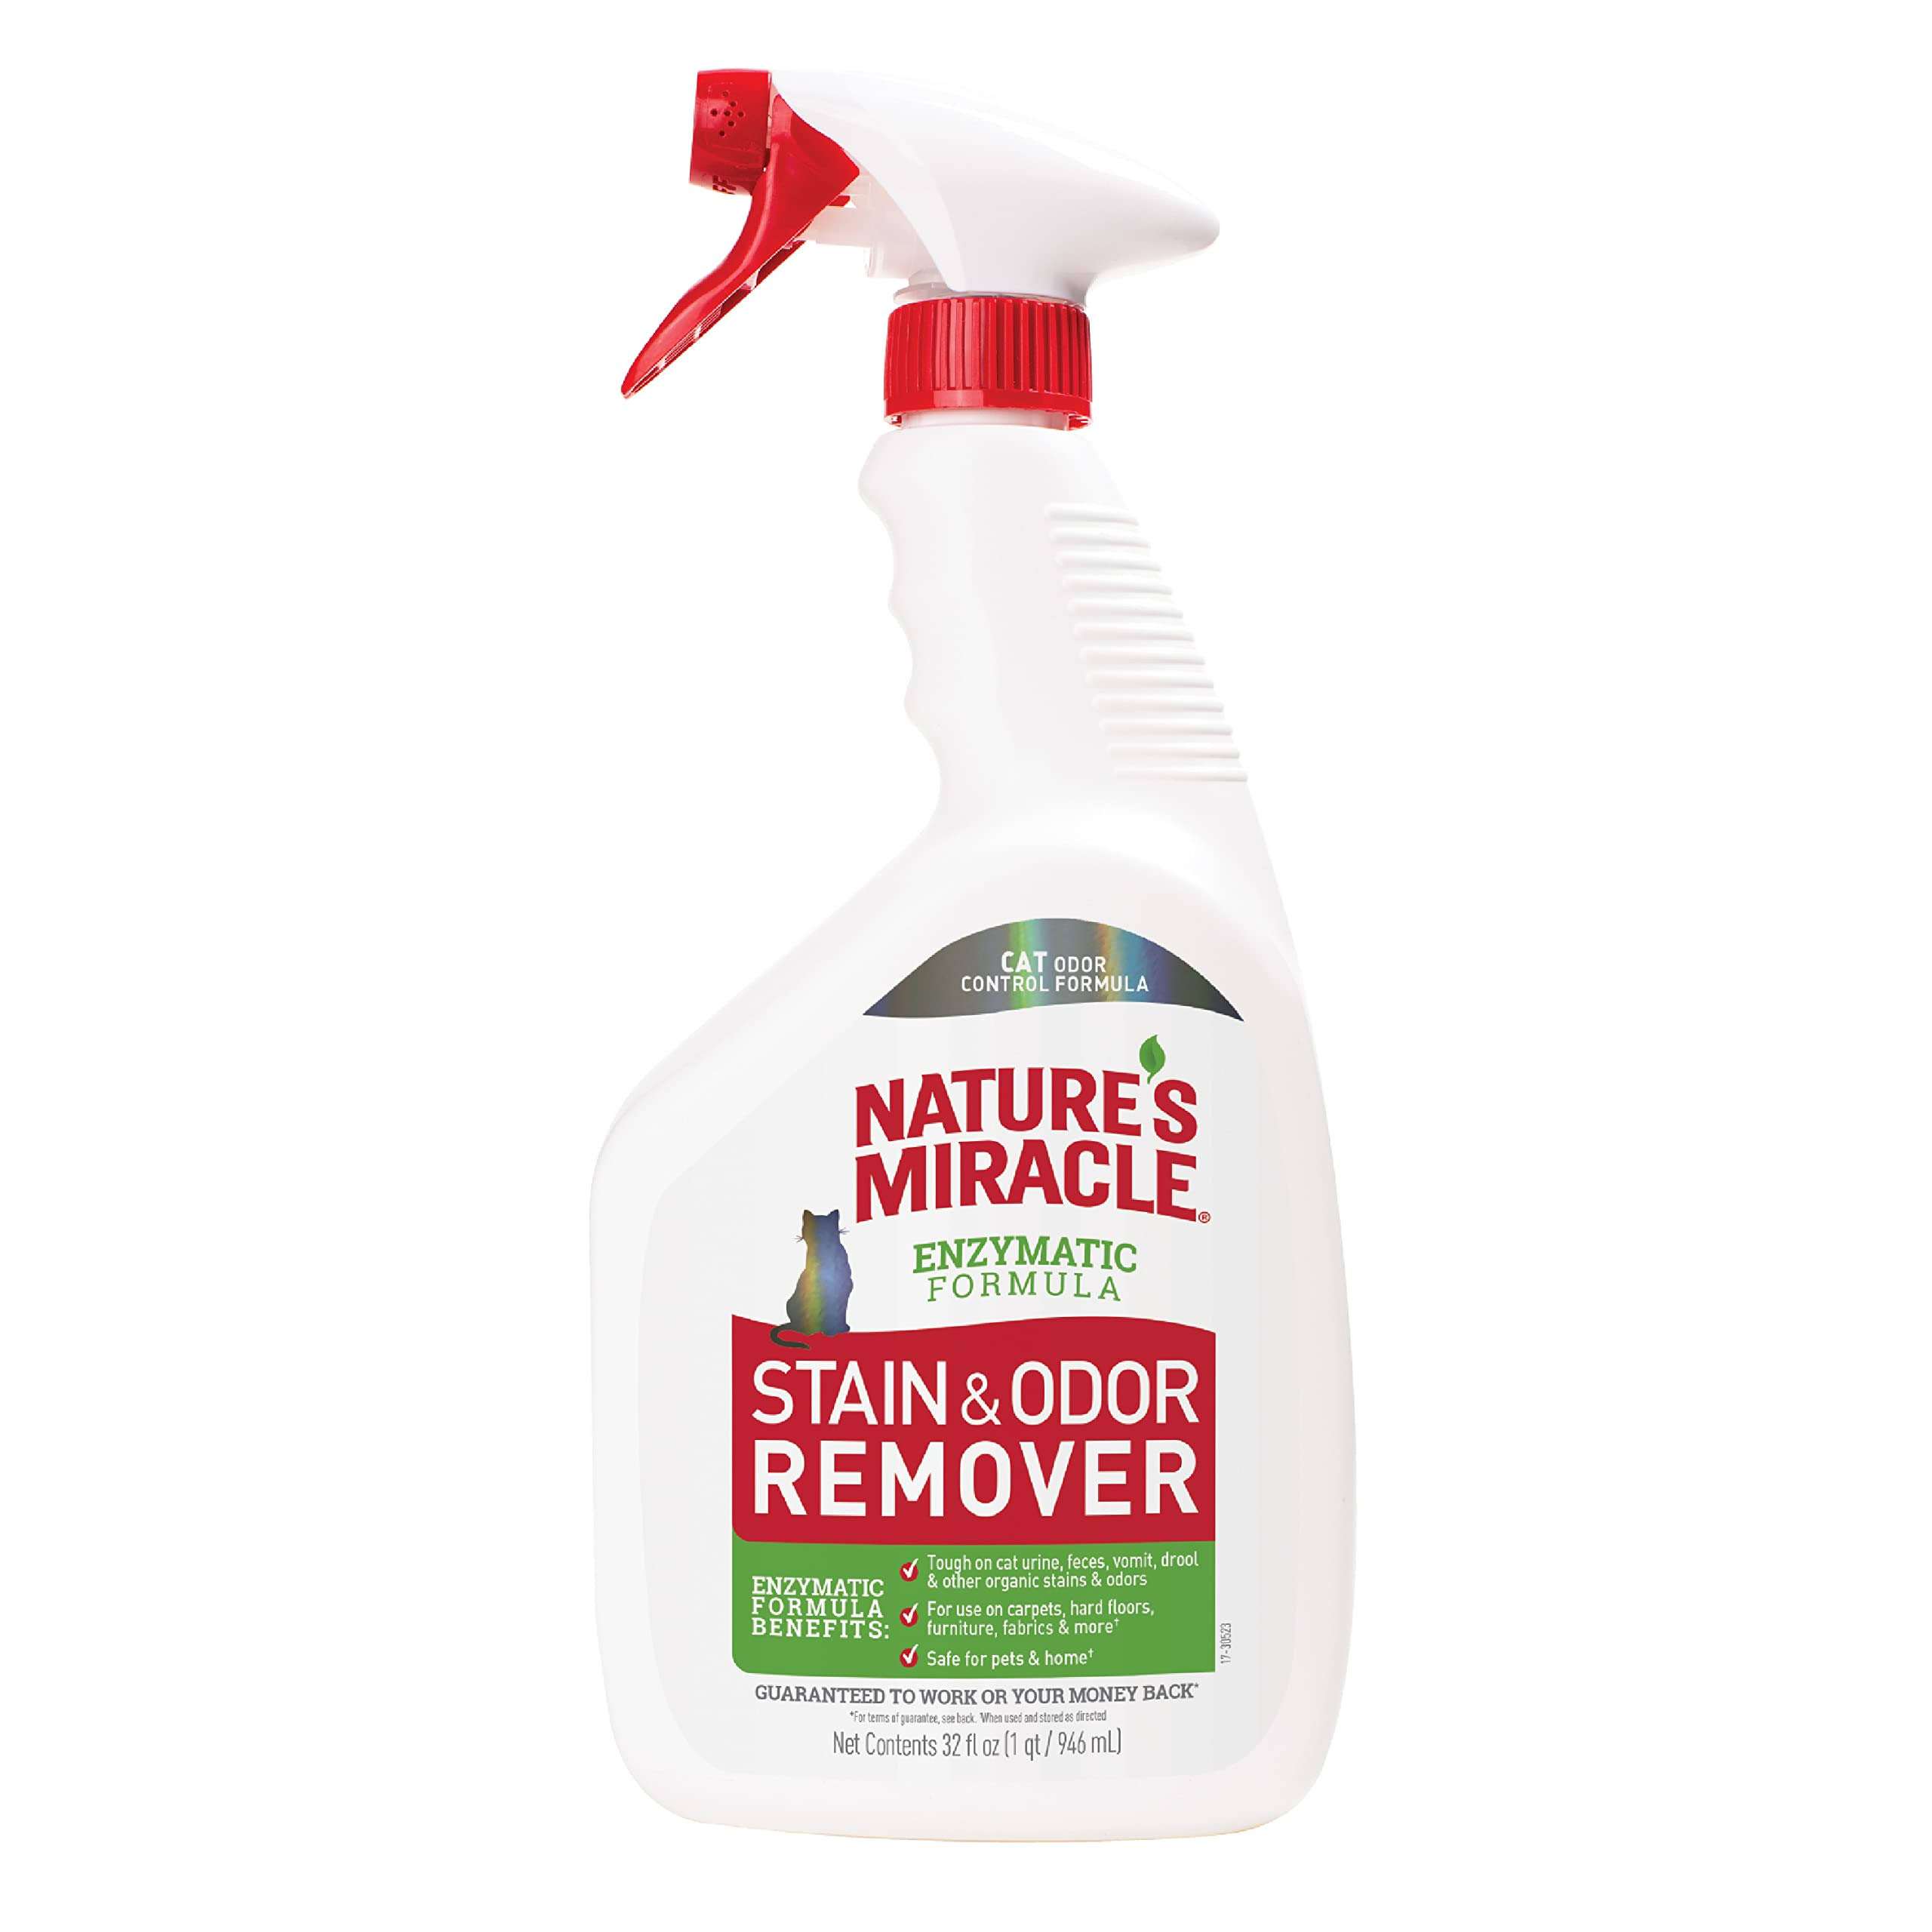 Nature's Miracle Cat Stain & Odor Remover Spray 32oz Enzymatic Formula